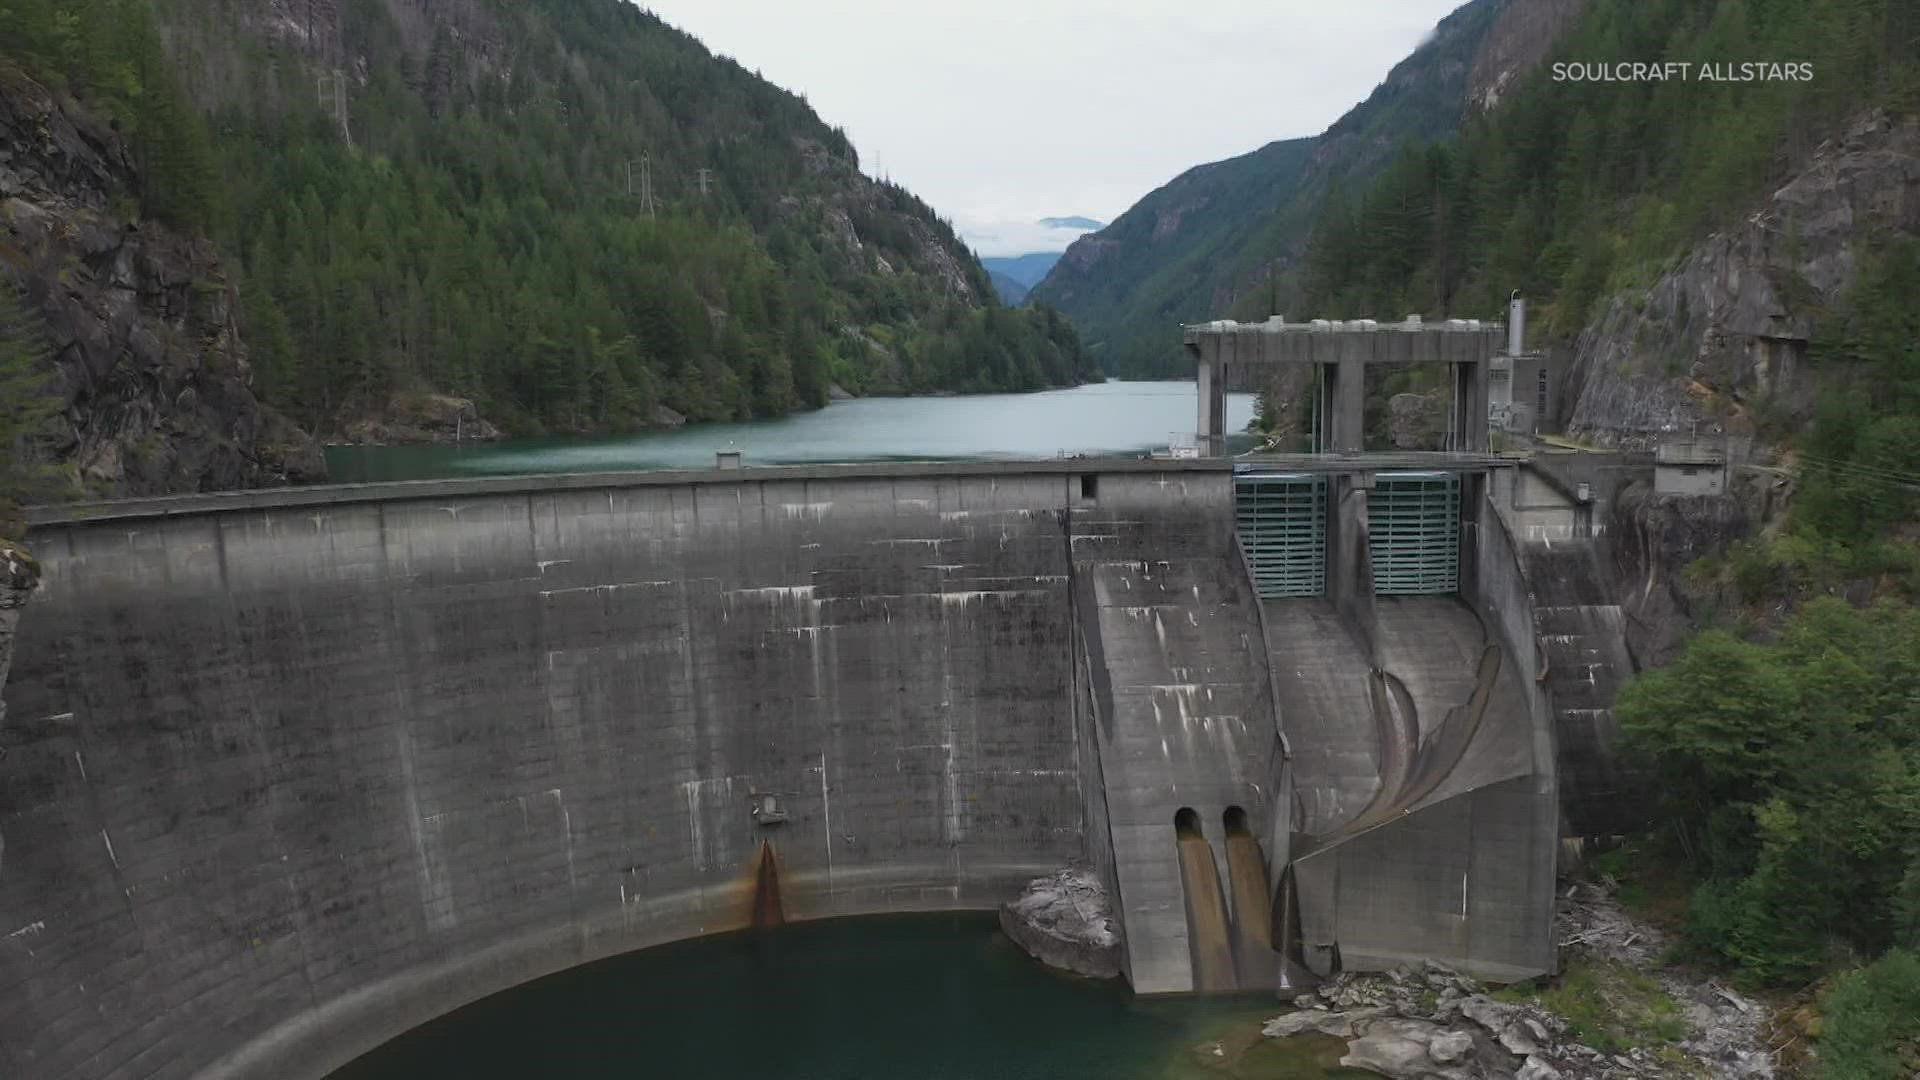 Seattle's Skagit hydropower project is the largest Green Certified project in the country. Stakeholders say the city gained the designation with bogus claims.